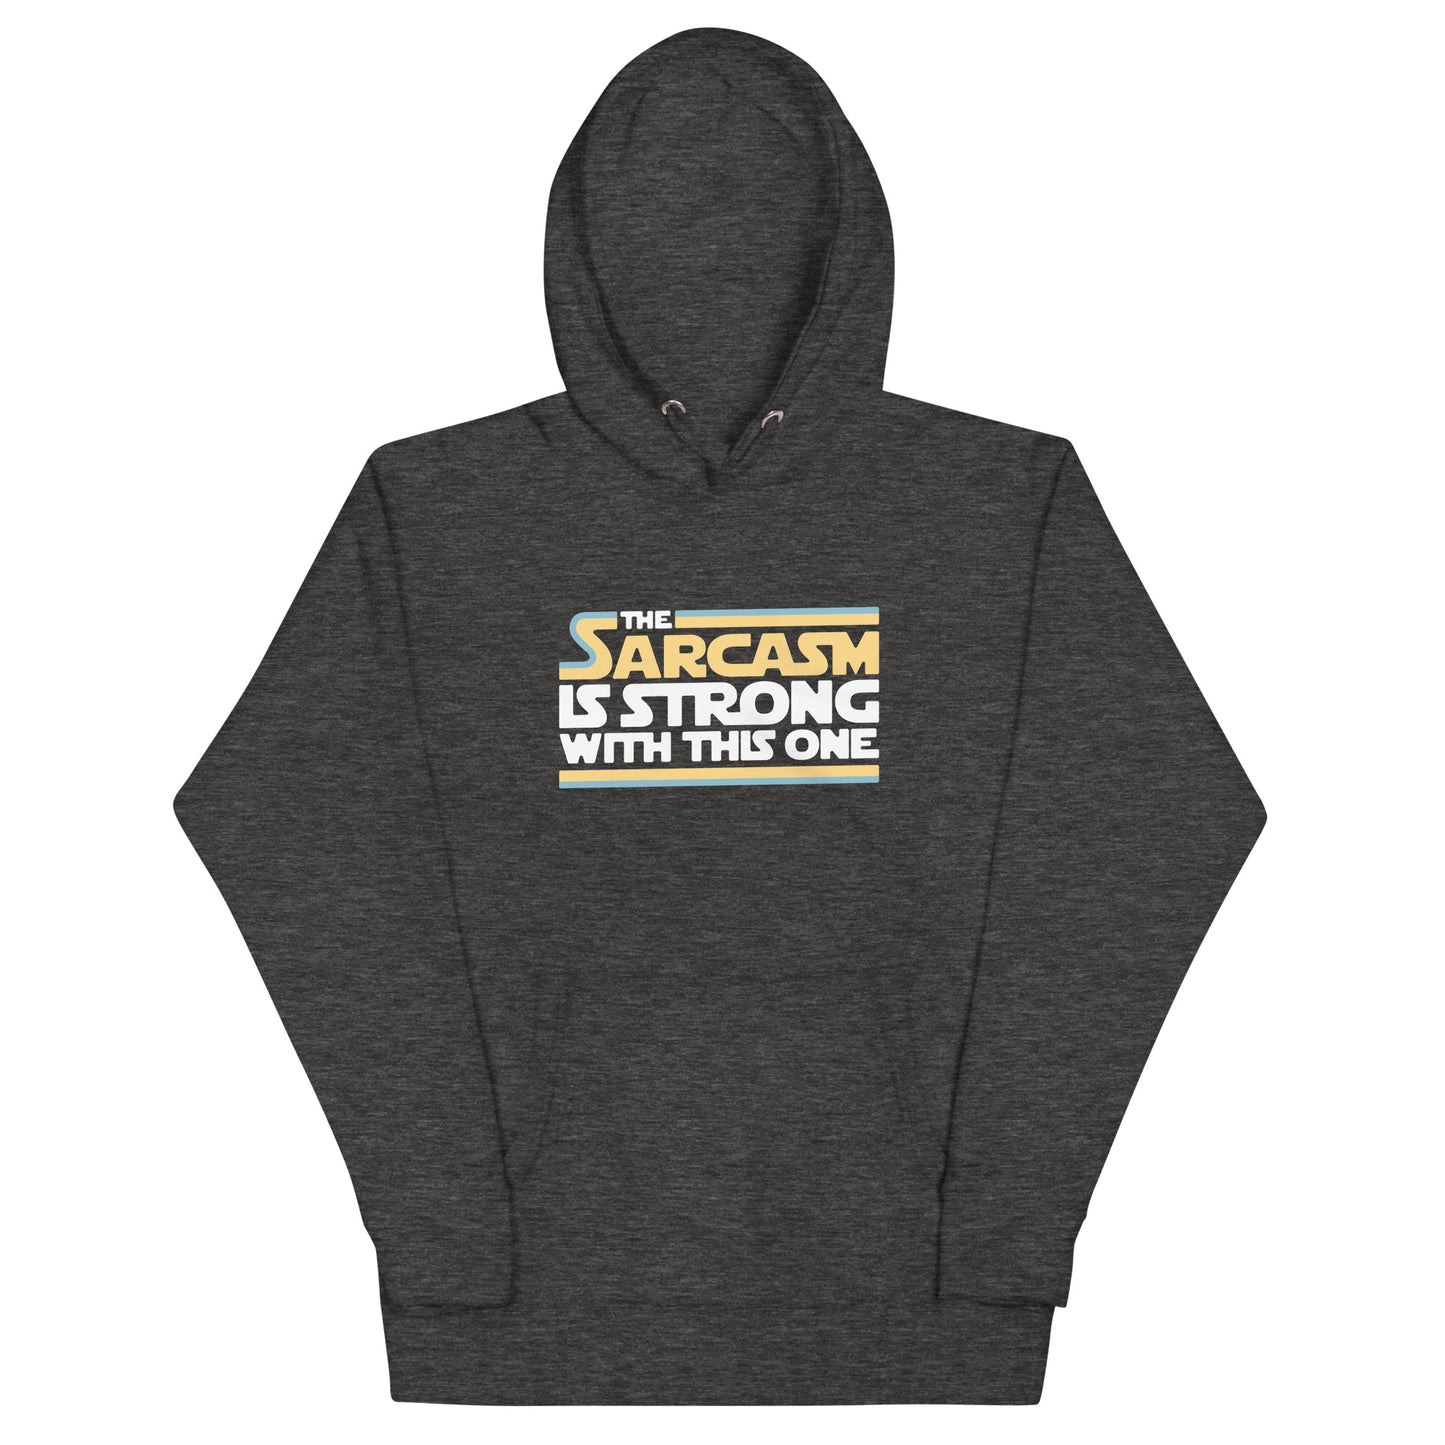 The Sarcasm Is Strong With This One Unisex Hoodie